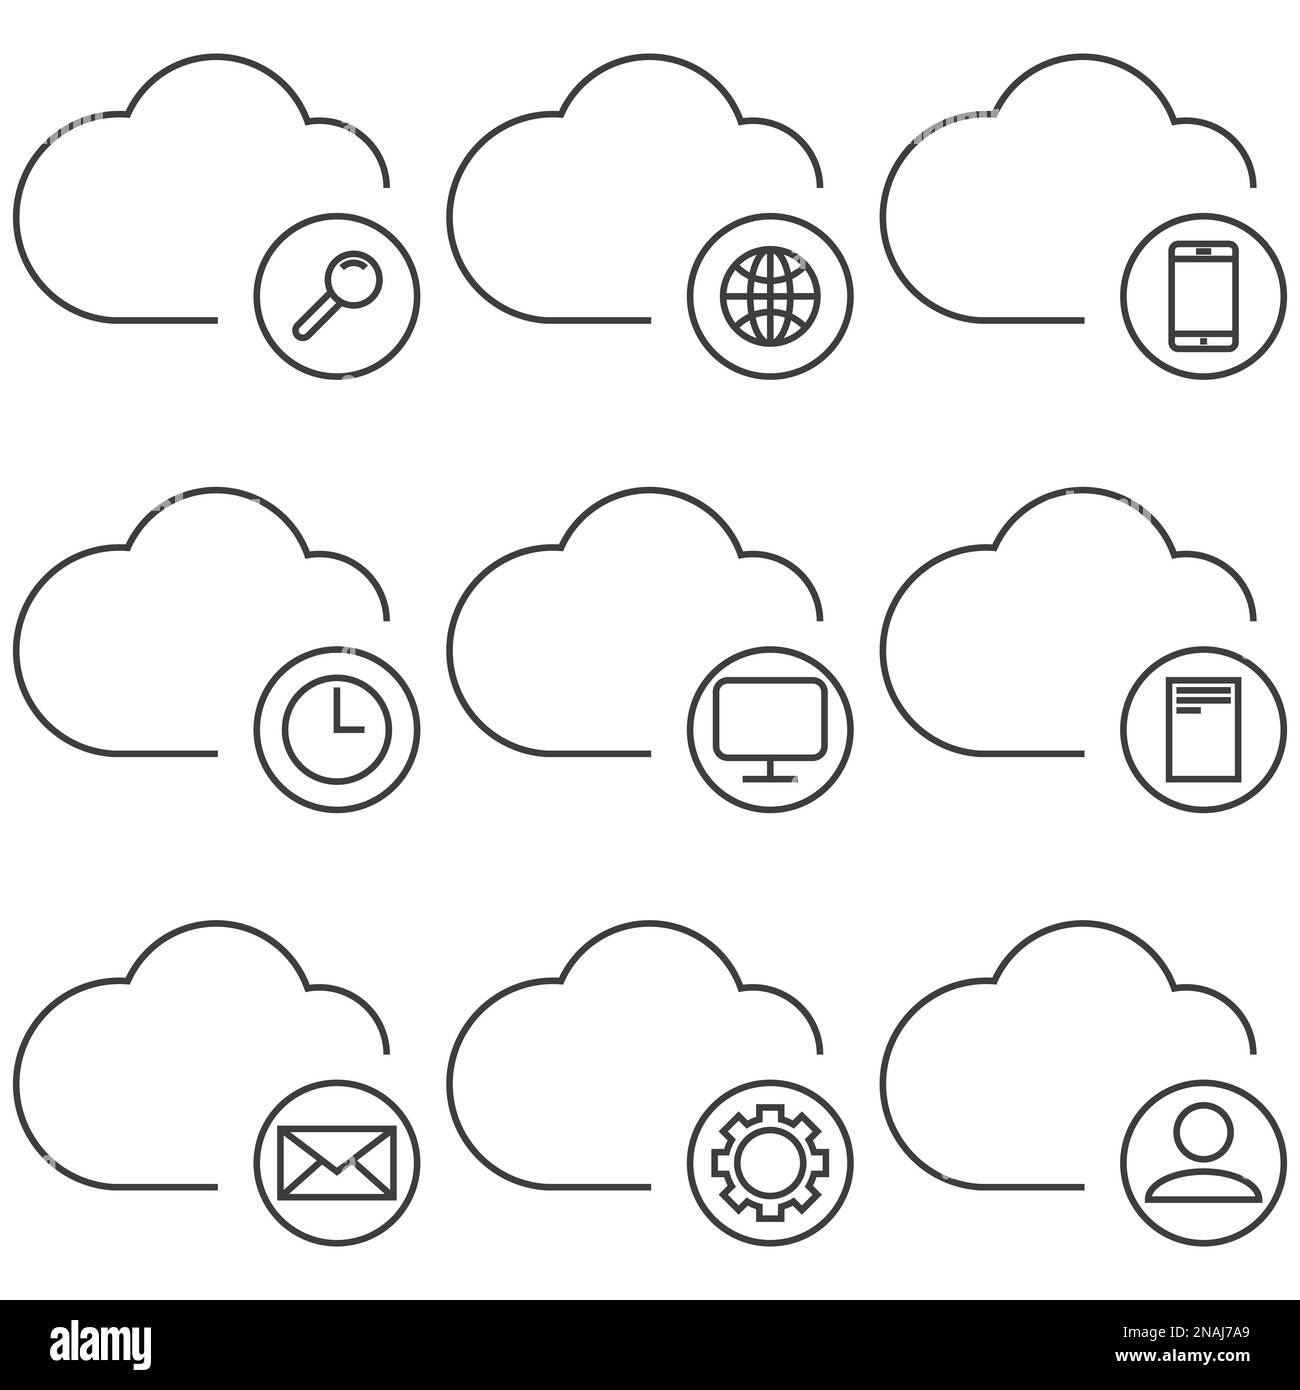 Set of objects on the theme of Cloud technology Stock Vector